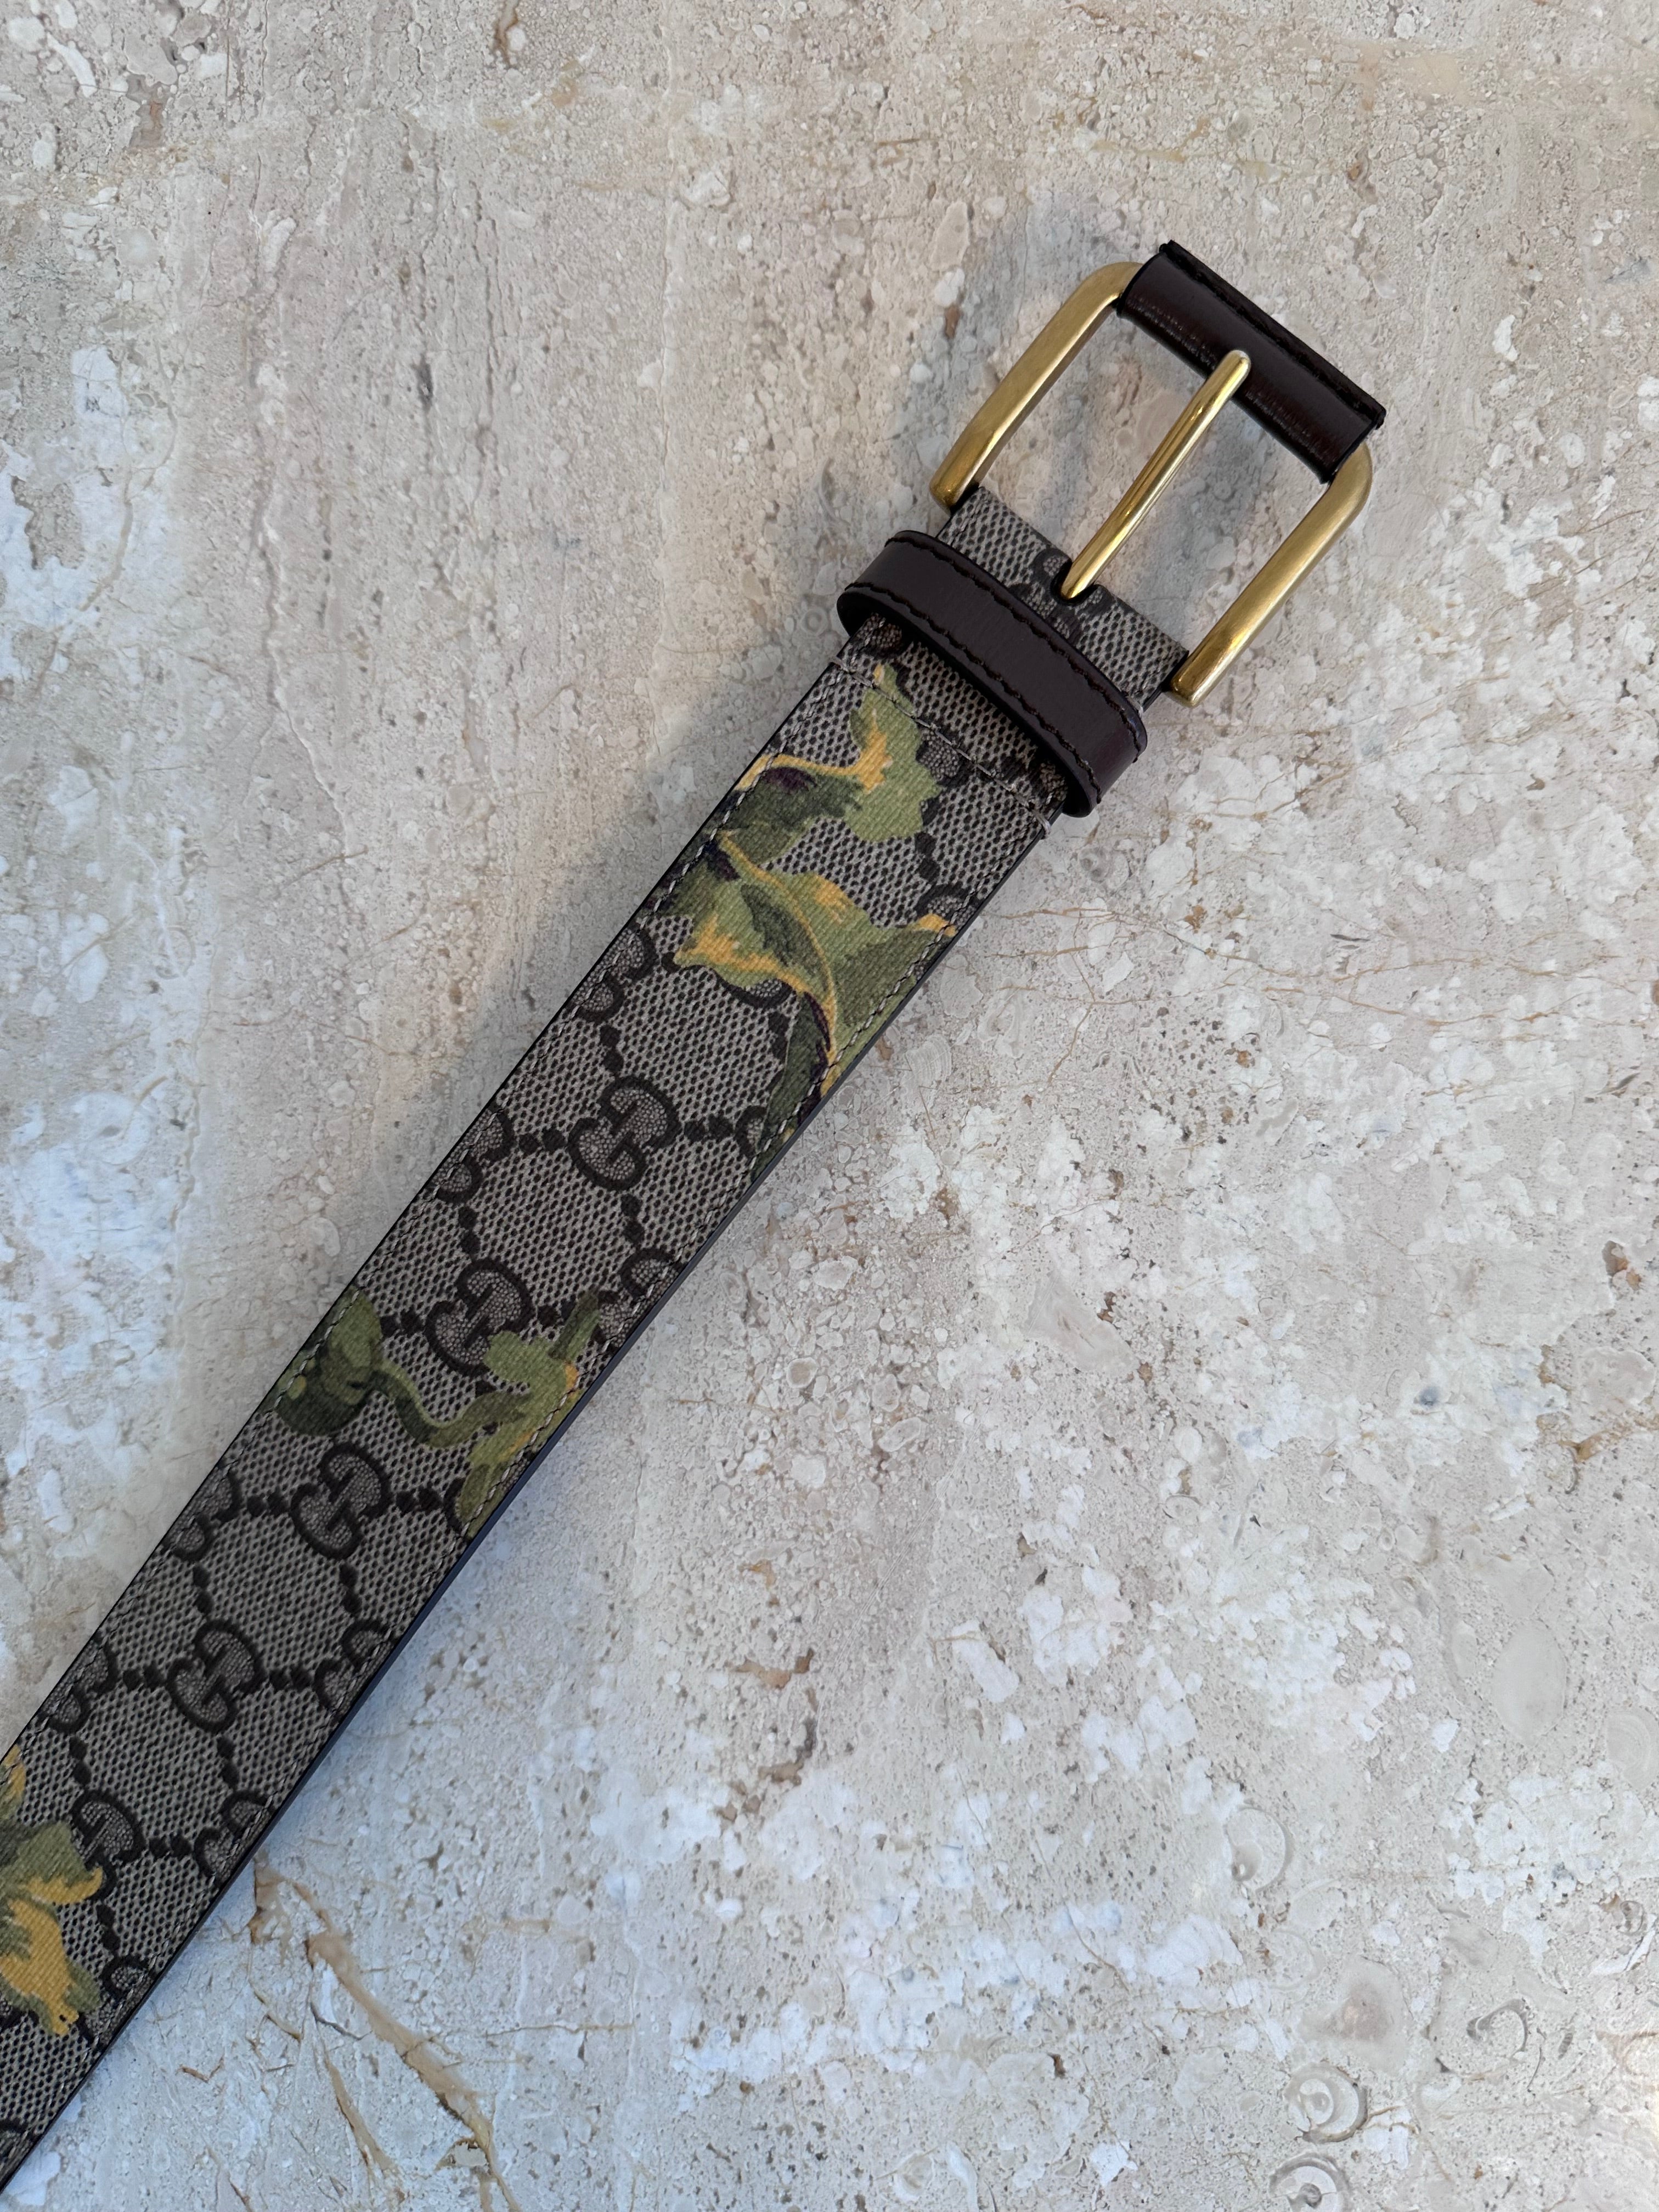 Pre-Owned GUCCI Flora Belt Size 85/34